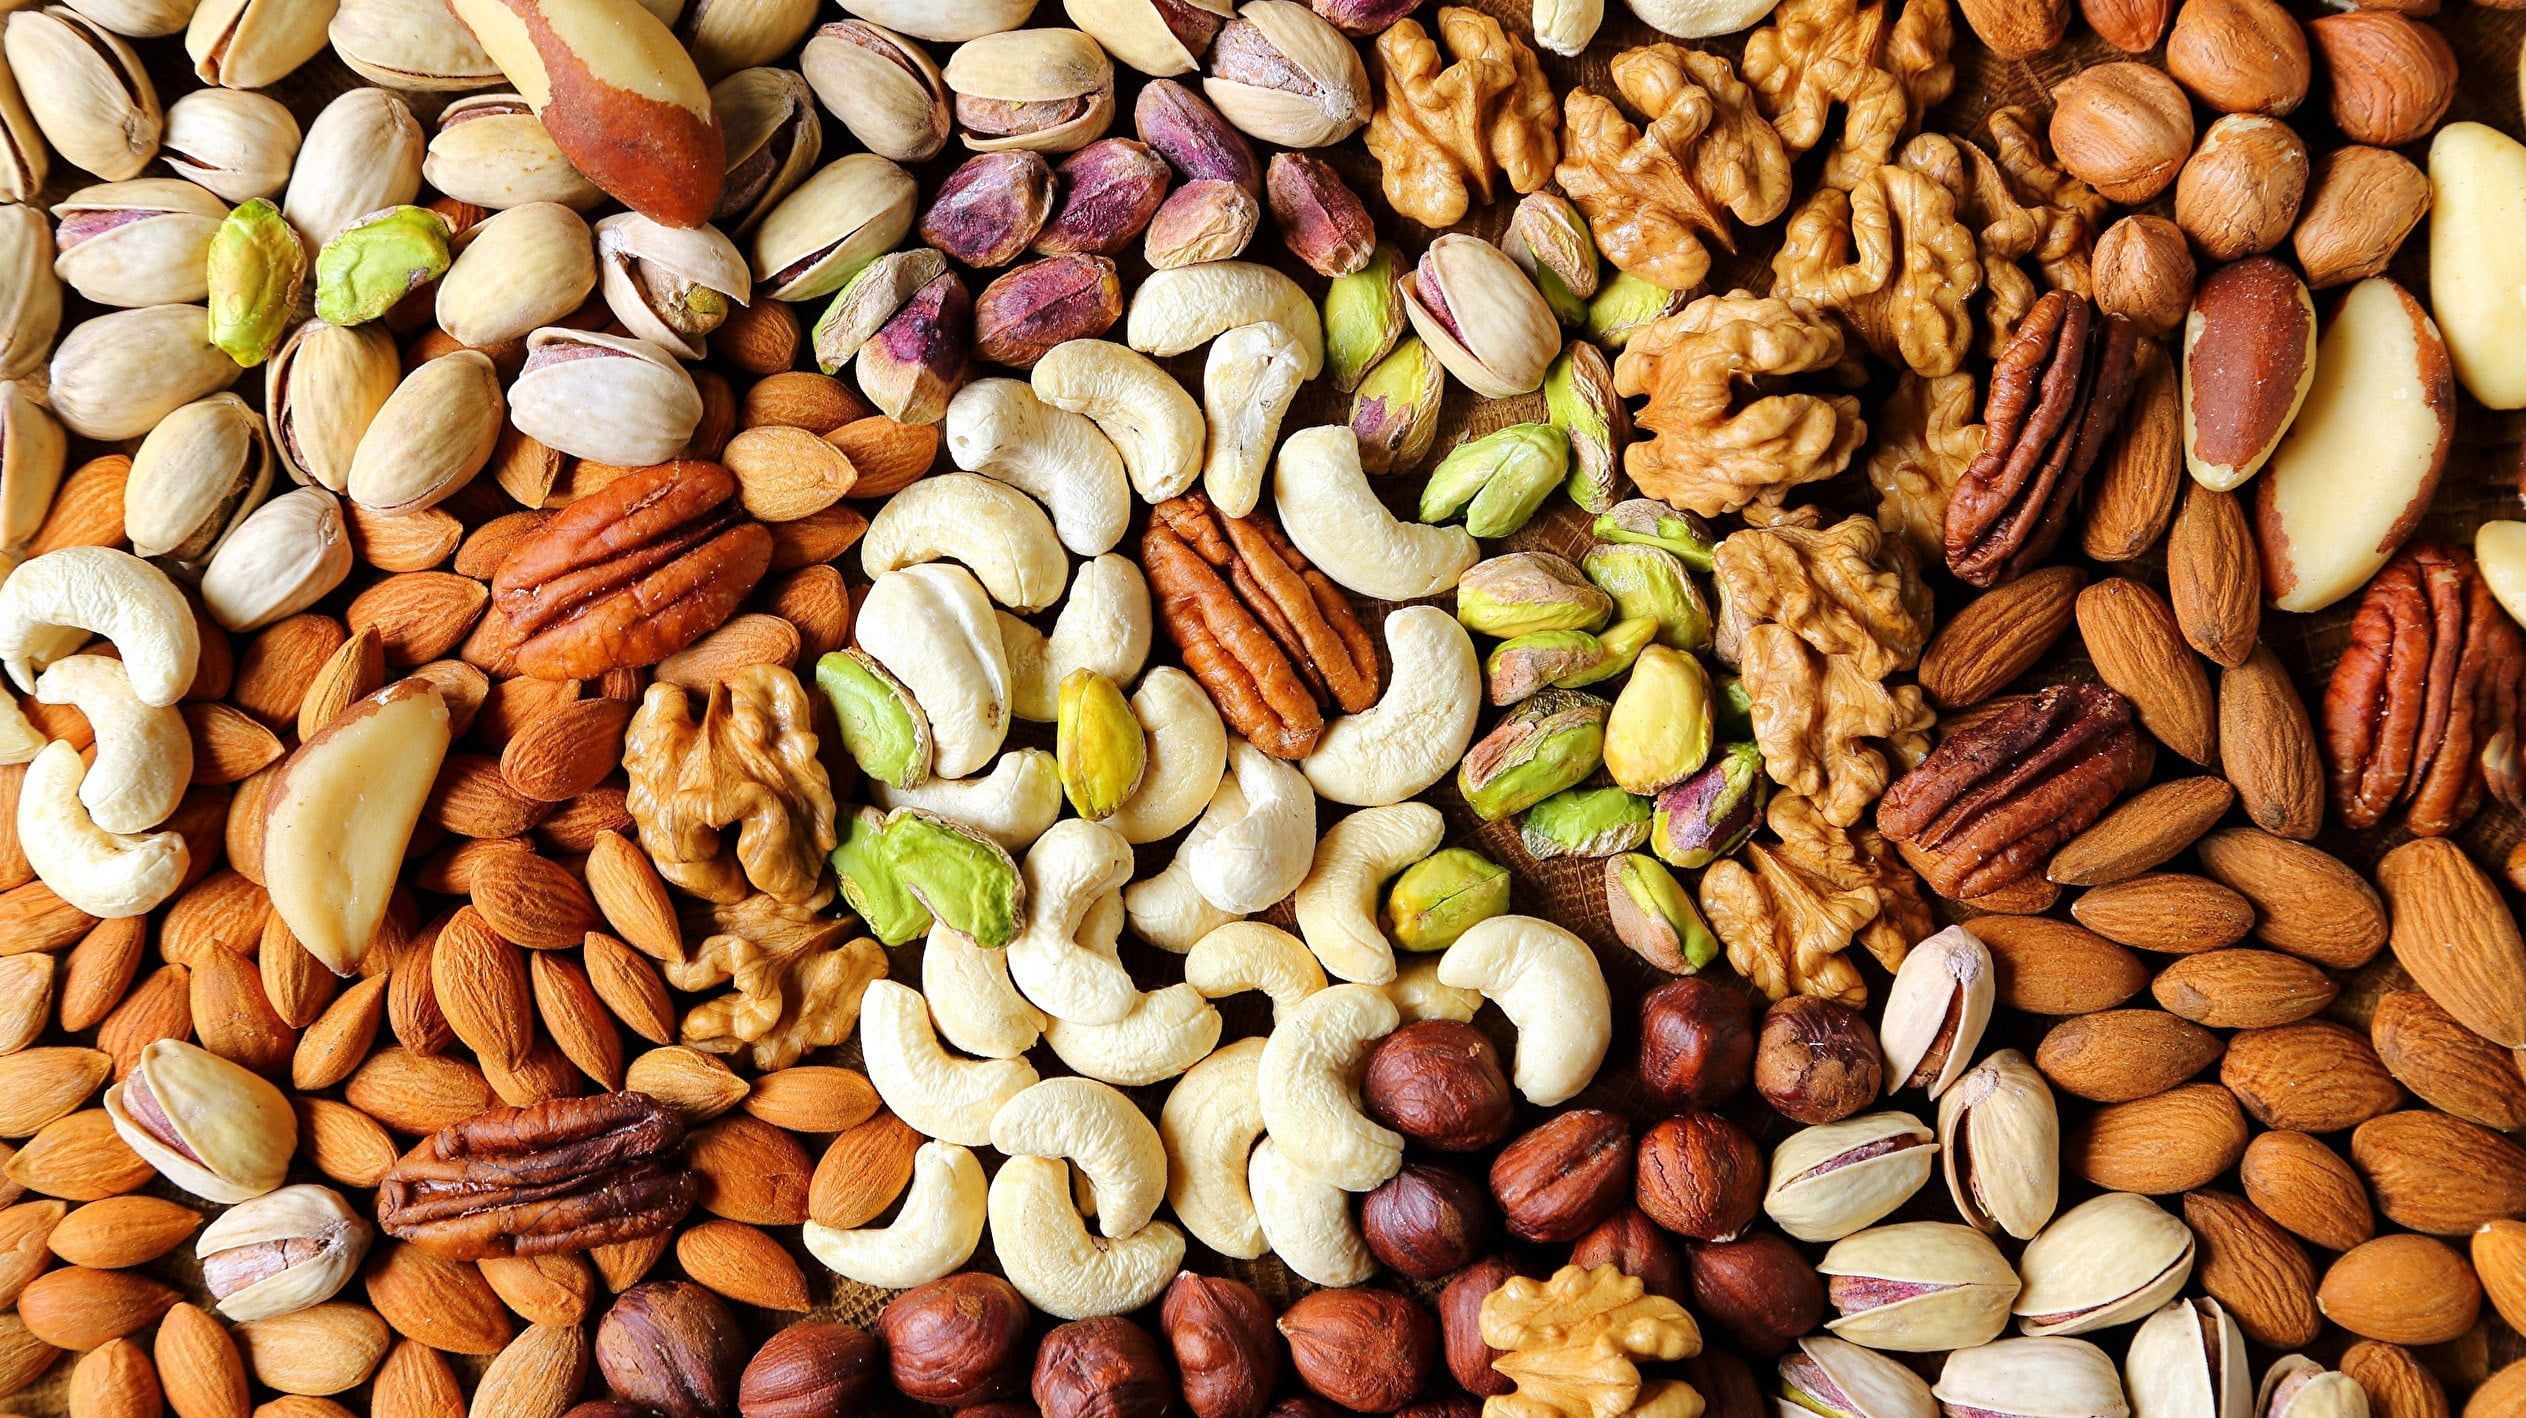 Cashew Nuts: A variety of nuts and seeds, Almonds, Walnuts. 2530x1420 HD Wallpaper.